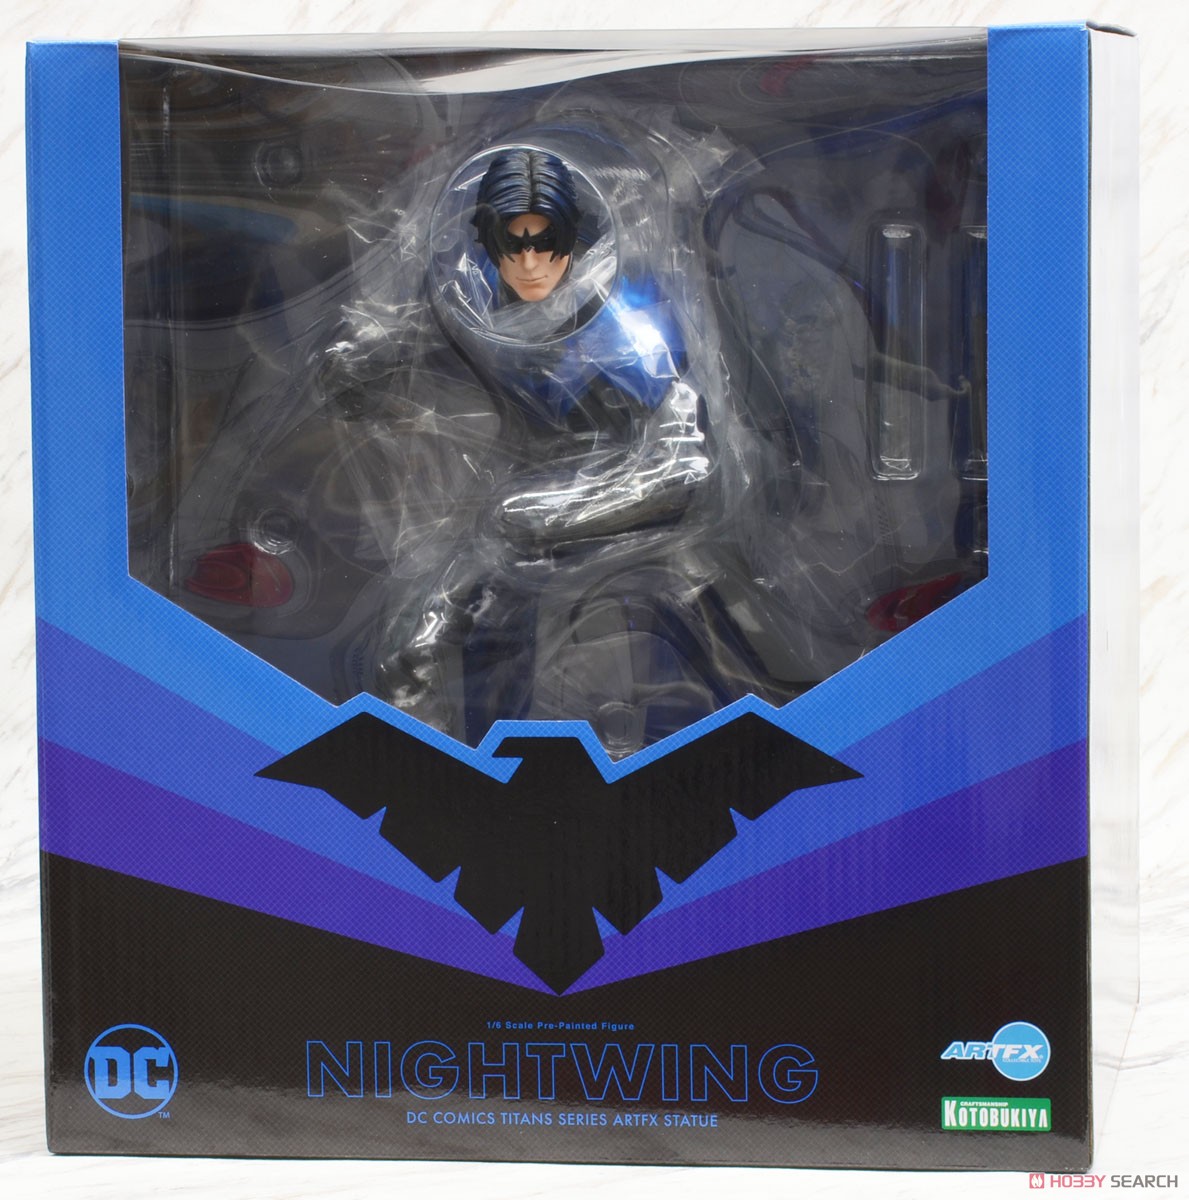 Artfx Nightwing (Completed) Package1